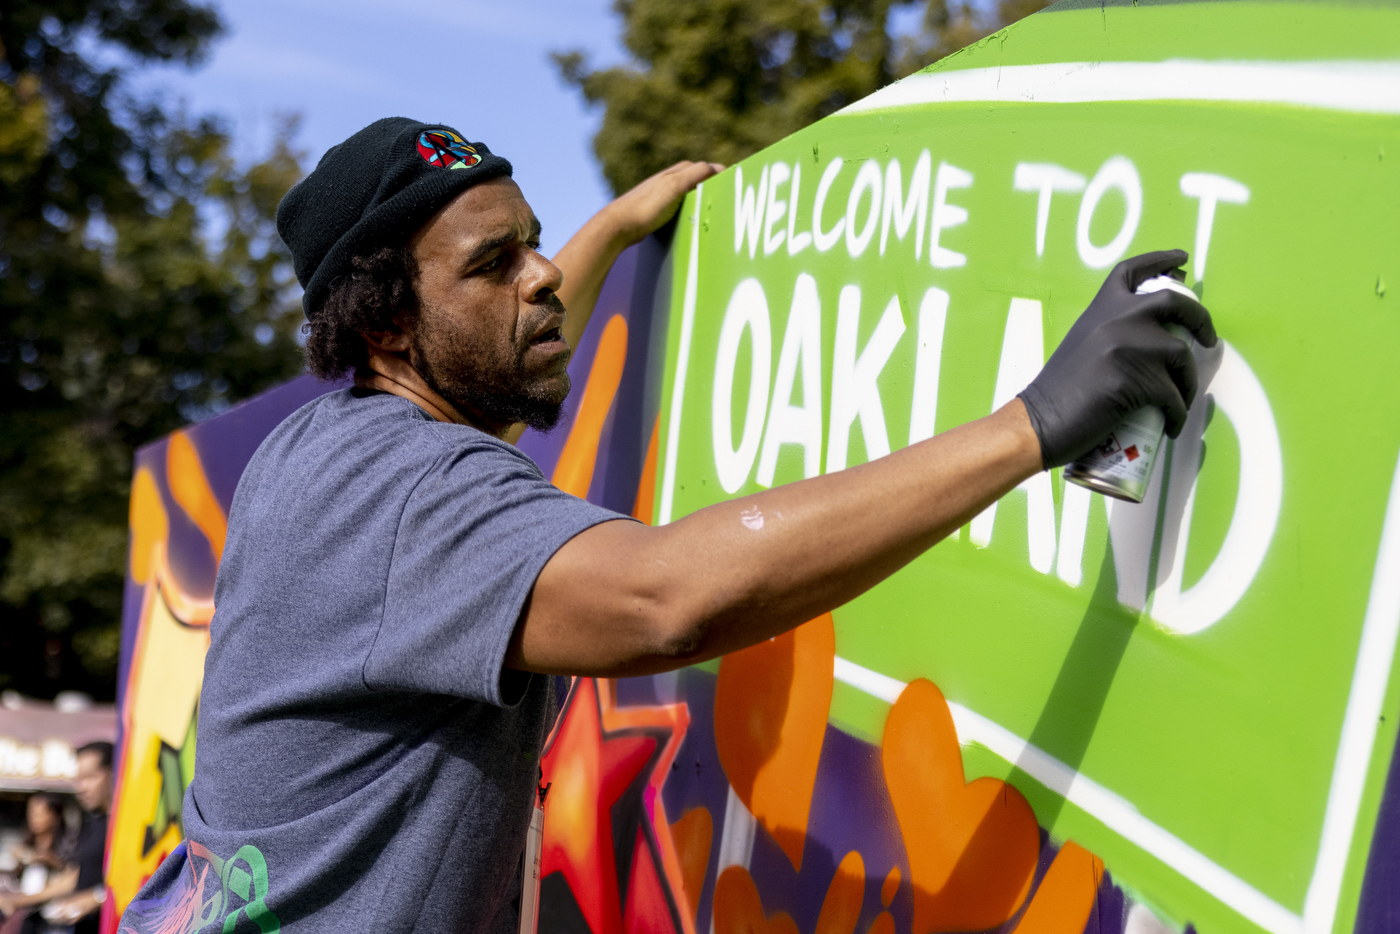 a person spray paints a sign that says 'welcome to Oakland'